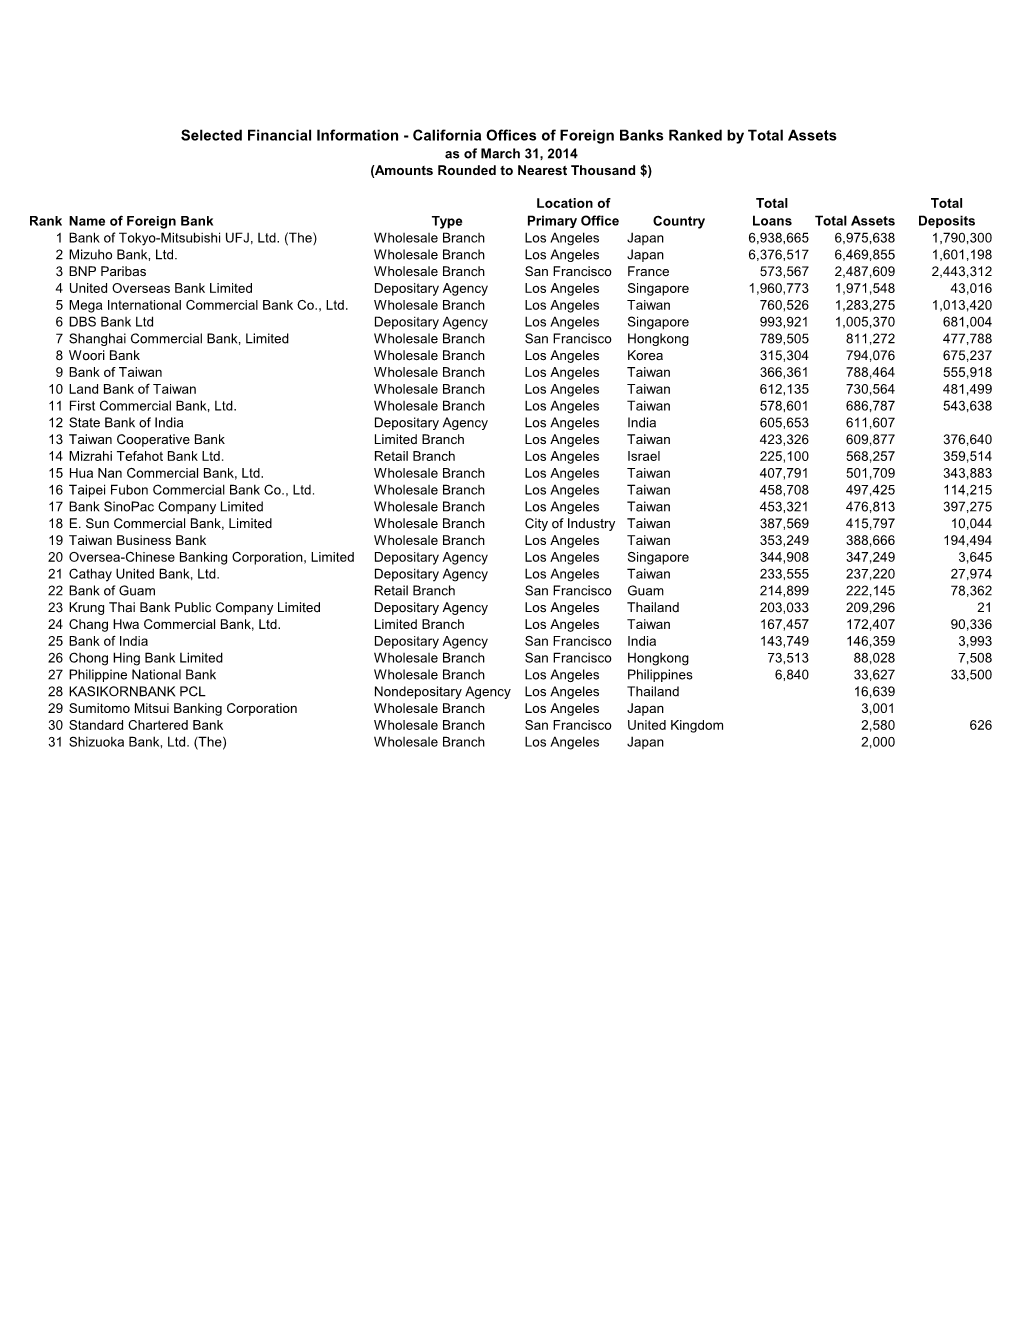 California Offices of Foreign Banks Ranked by Total Assets As of March 31, 2014 (Amounts Rounded to Nearest Thousand $)